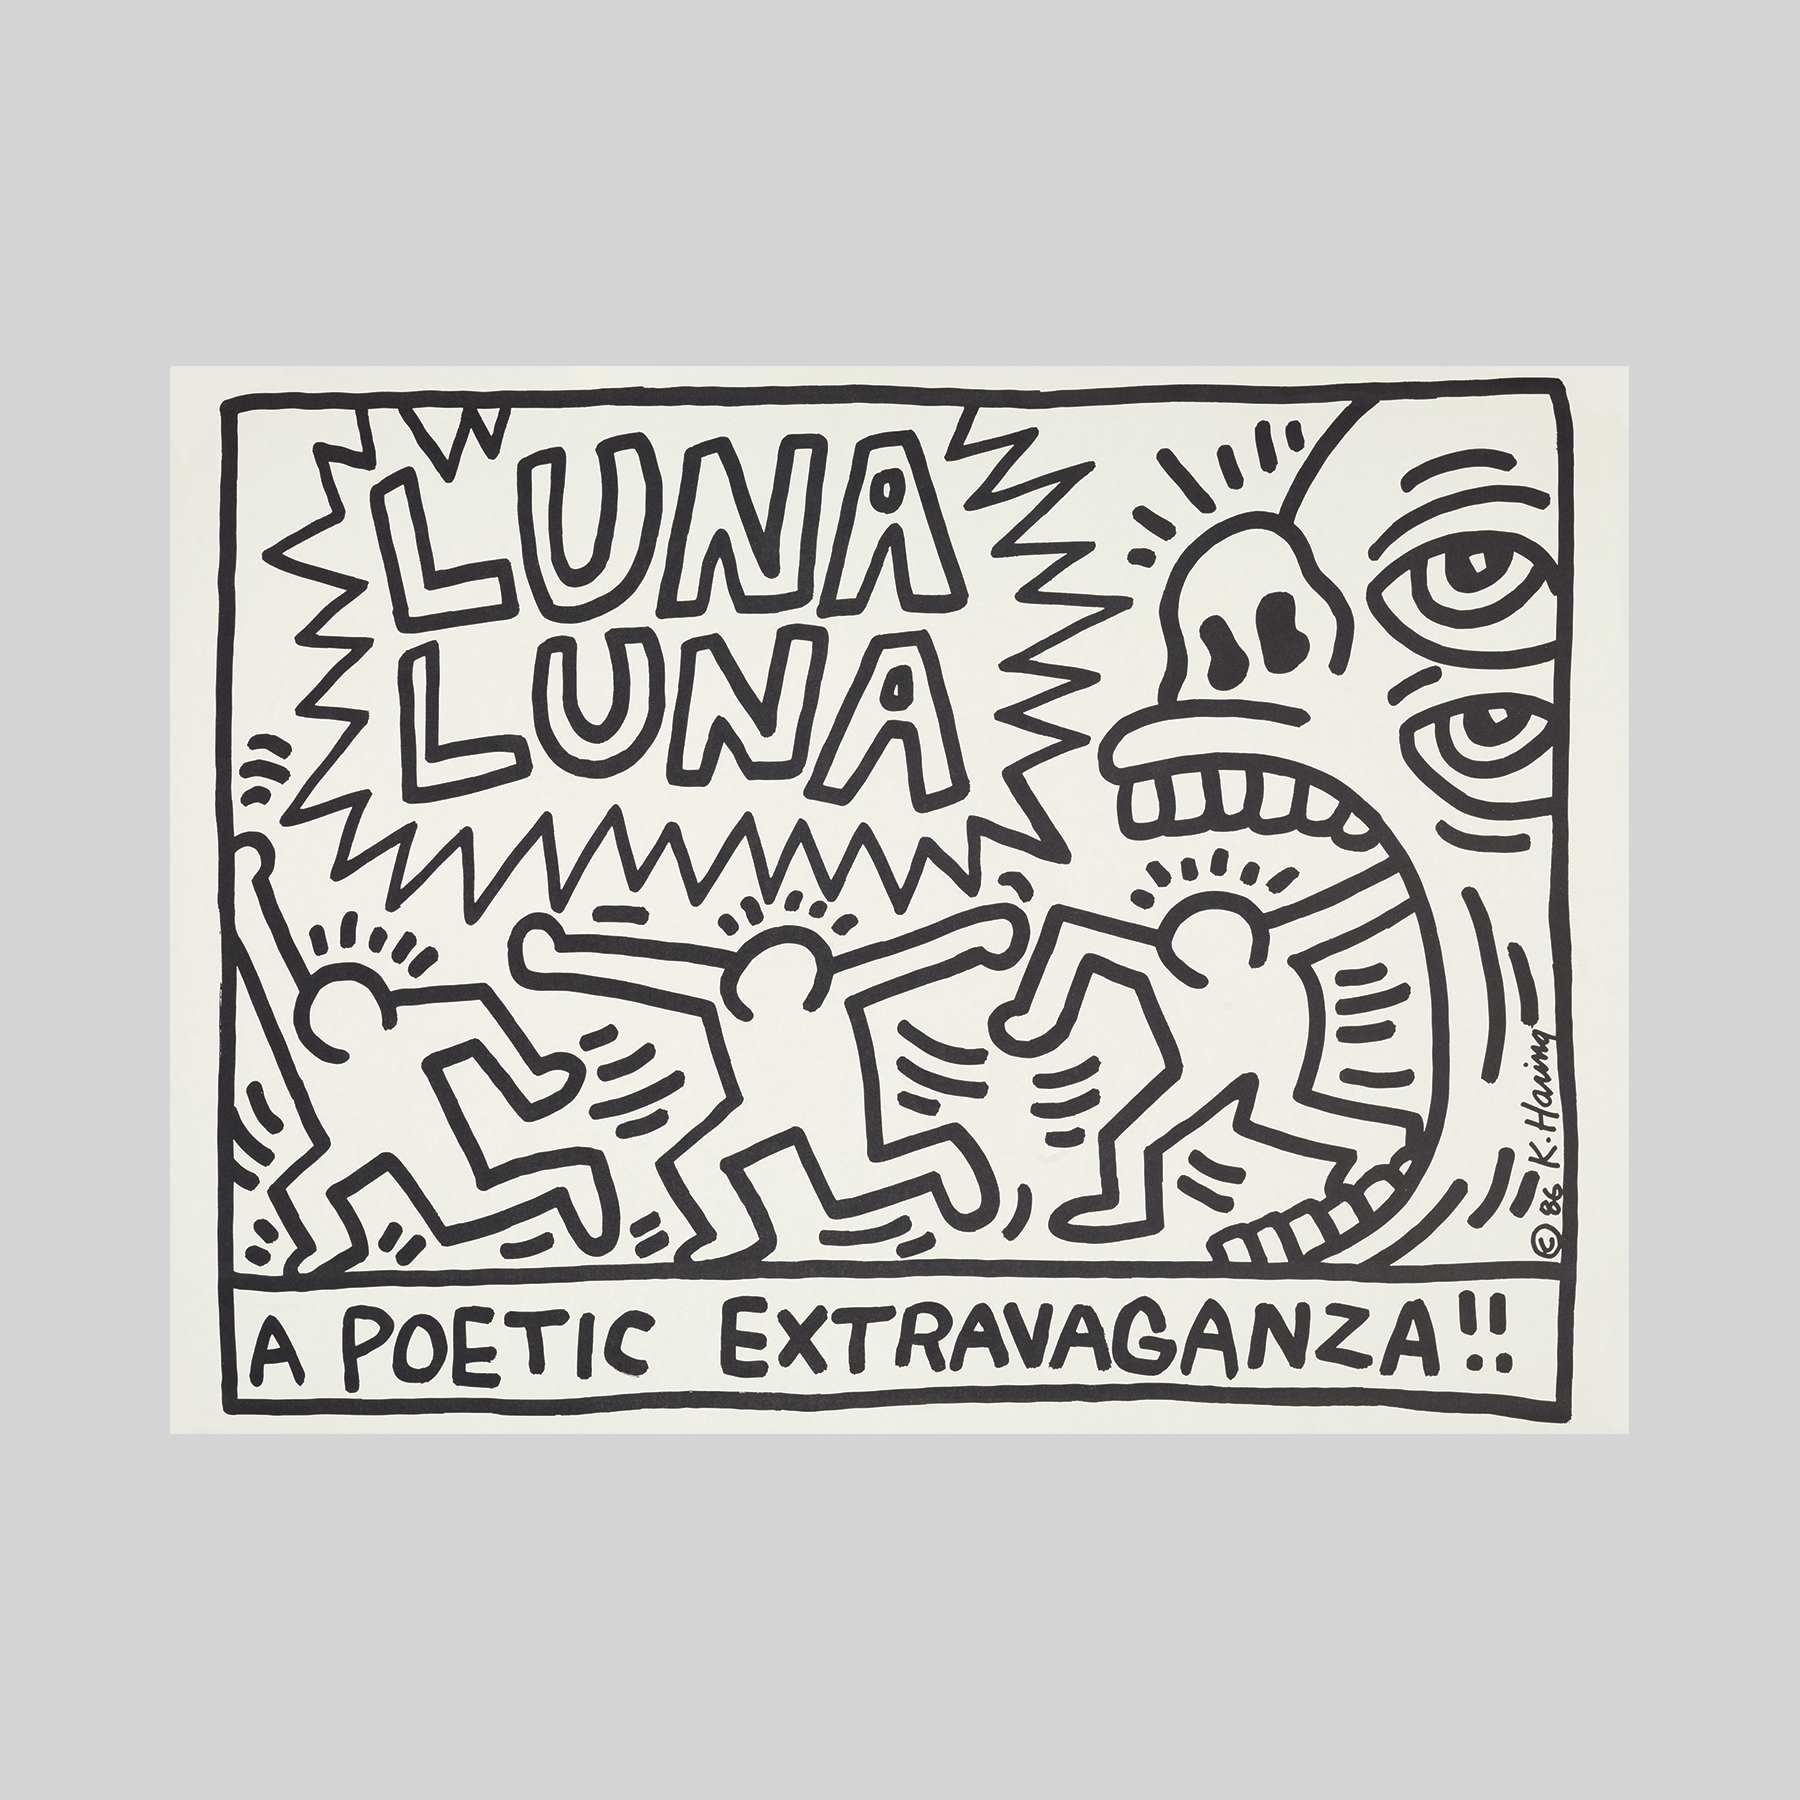 Archival Keith Haring Poster for Luna Luna